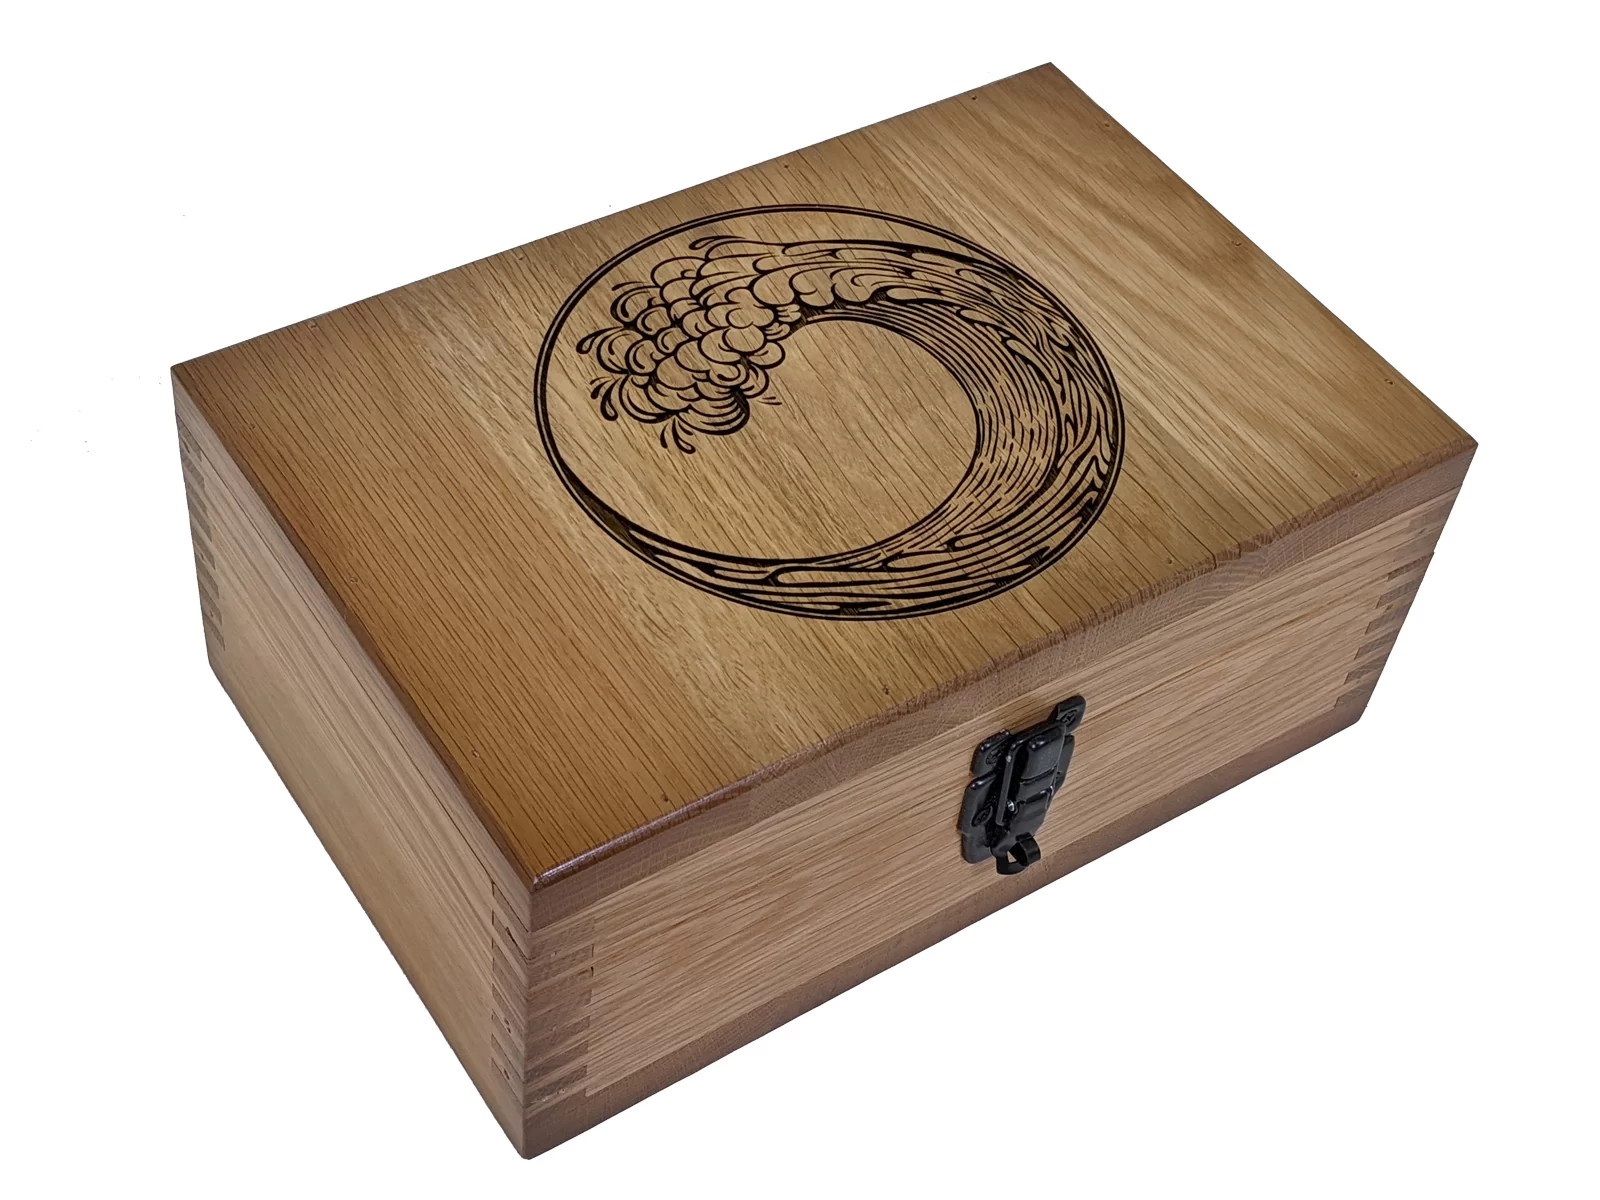 Details about   Octopus S Oak Jewellery Box 6x4 Photo Window FREE ENGRAVING Marine Gift 249 